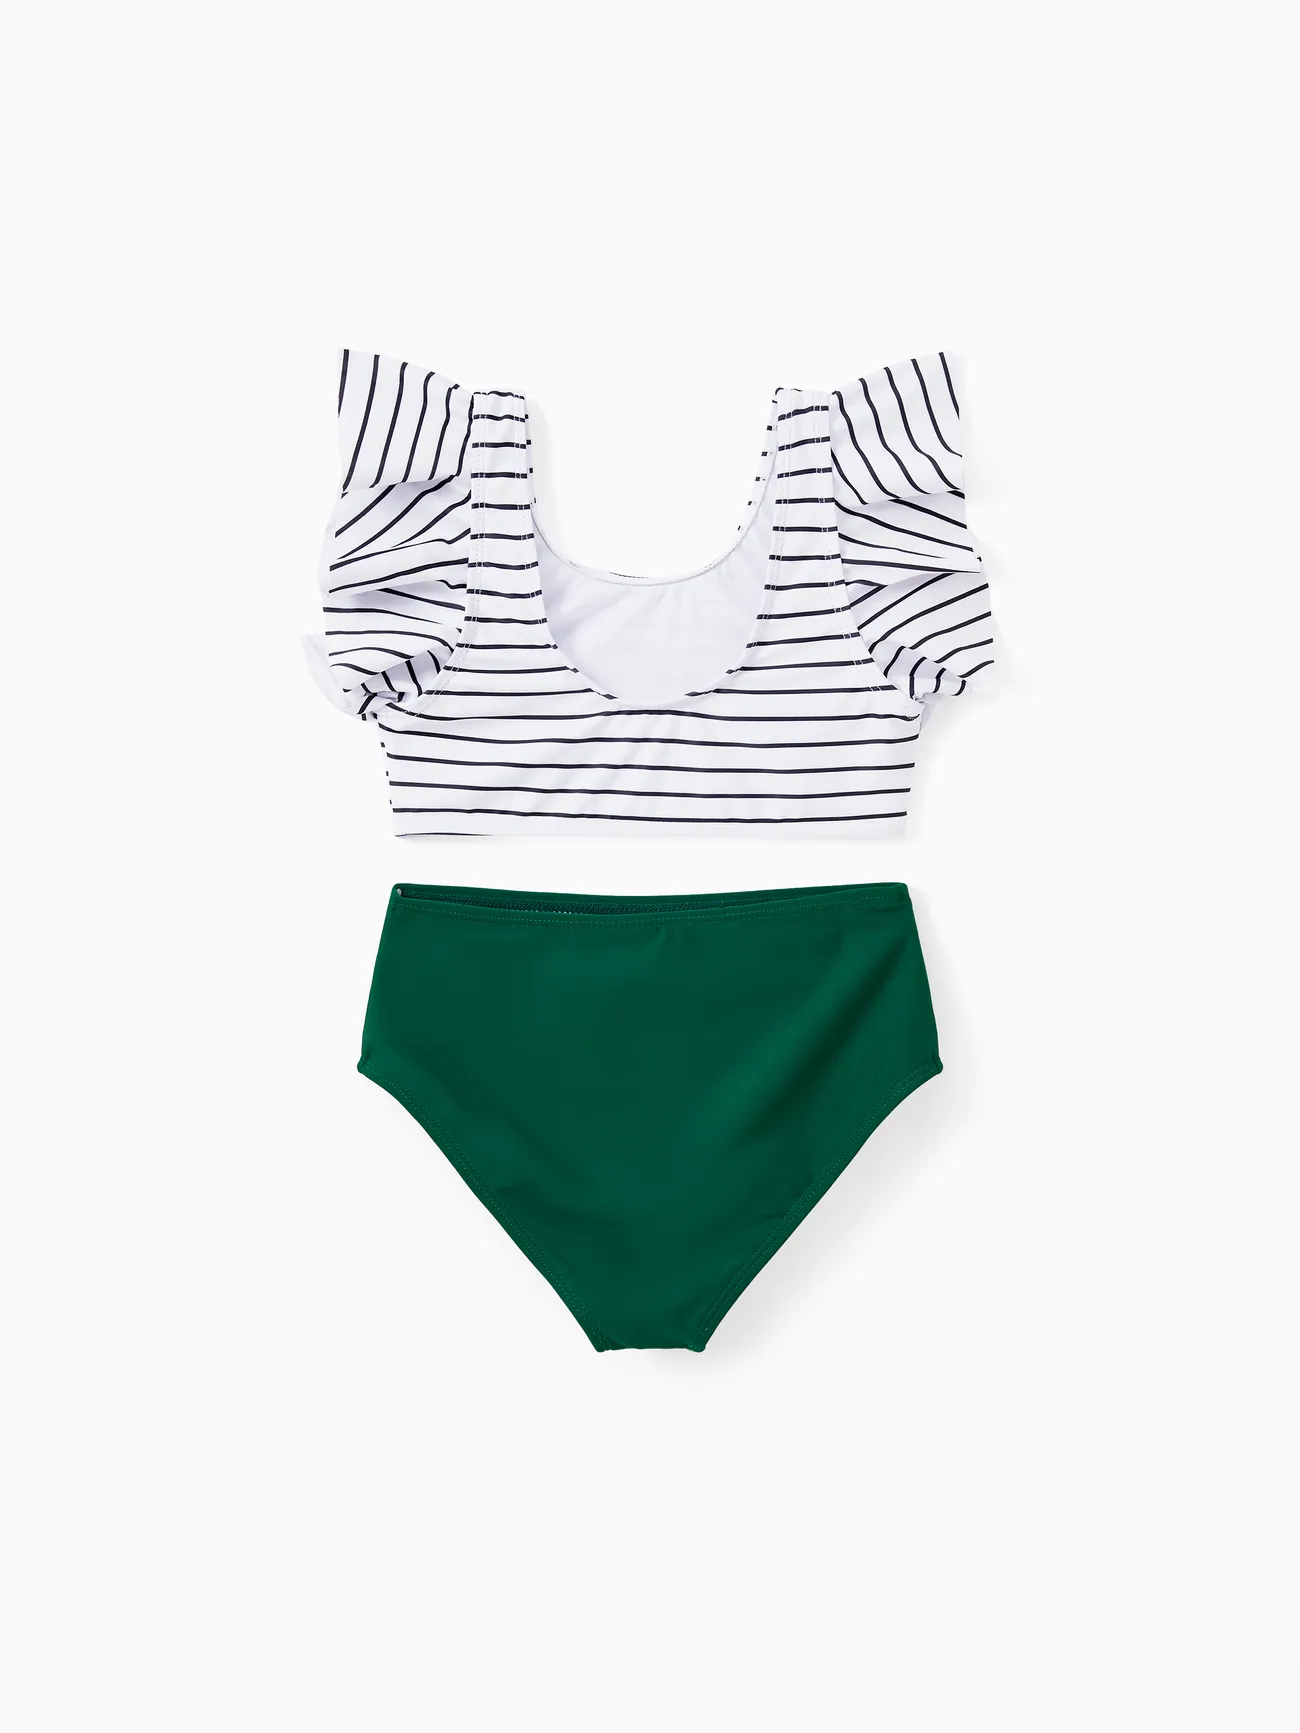 Family Matching Color Block Drawstring Swim Trunks or Stripe Cross Front Two-Piece Swimsuit (Quick-Dry) Green big image 1